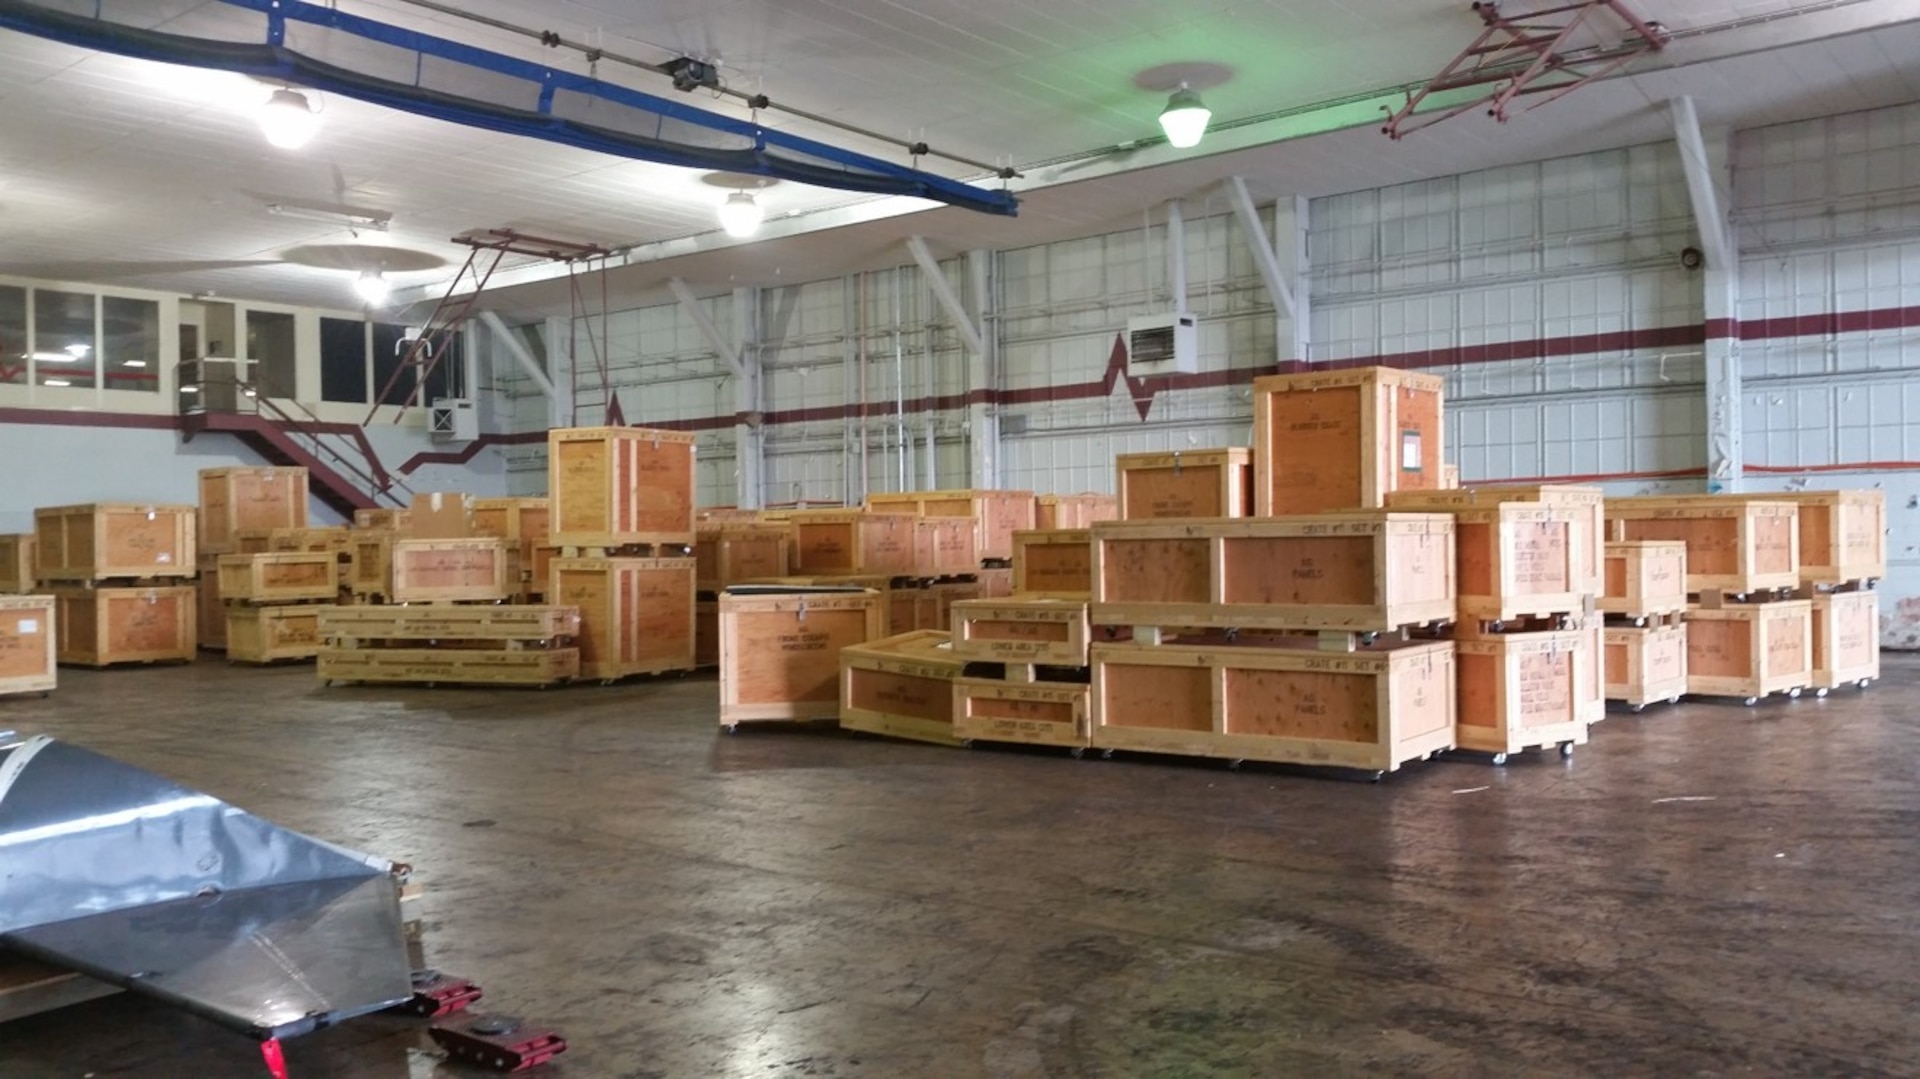 For Other Maintenance, or FOM, crates are shown stacked on the floor before installation of the ACTIVRAC 16 mobile high-density and permanent storage shelves. (Courtesy photo)